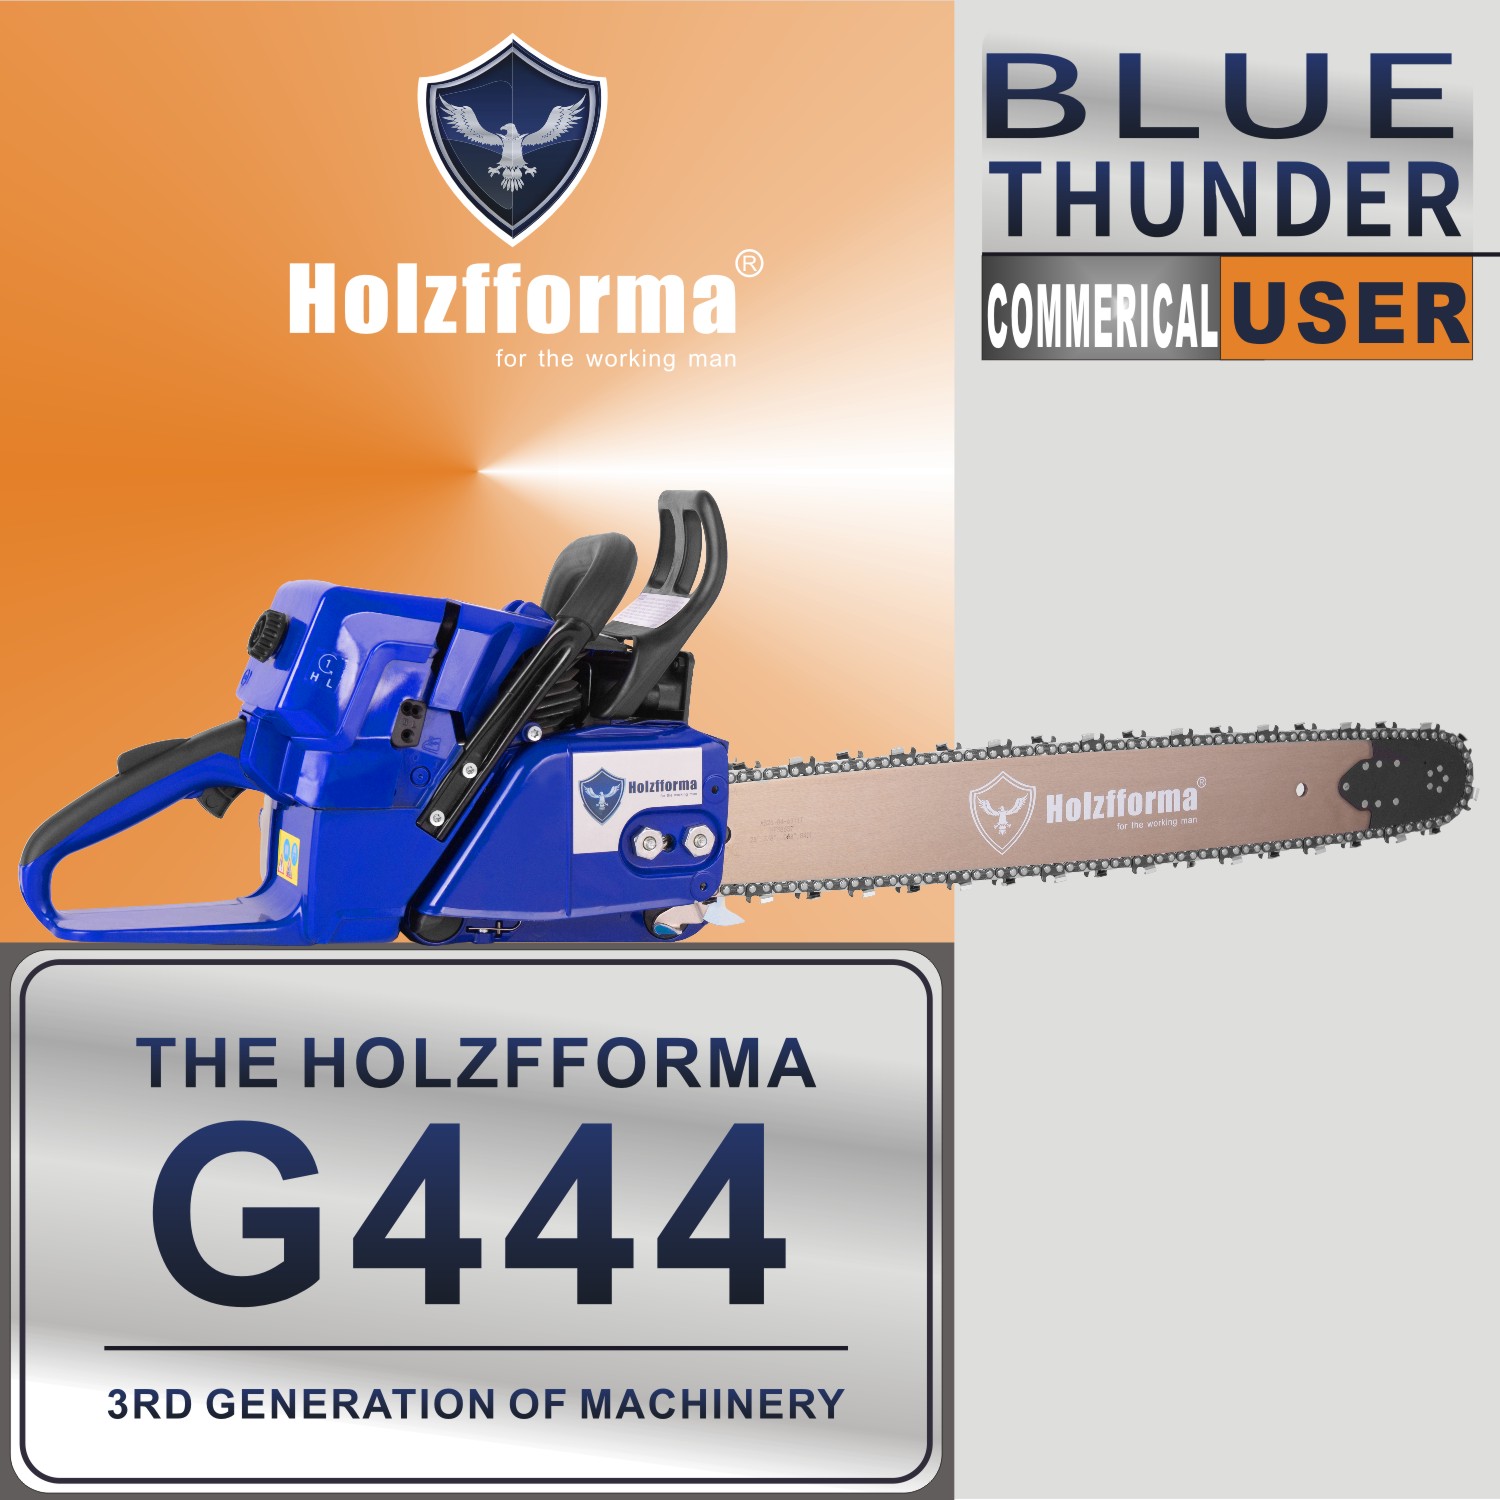 71cc Holzfforma® Blue Thunder G444 Gasoline Chain Saw Power Head Without Guide Bar and Chain Top Quality By Farmertec All parts are For MS440 044 Chainsaw